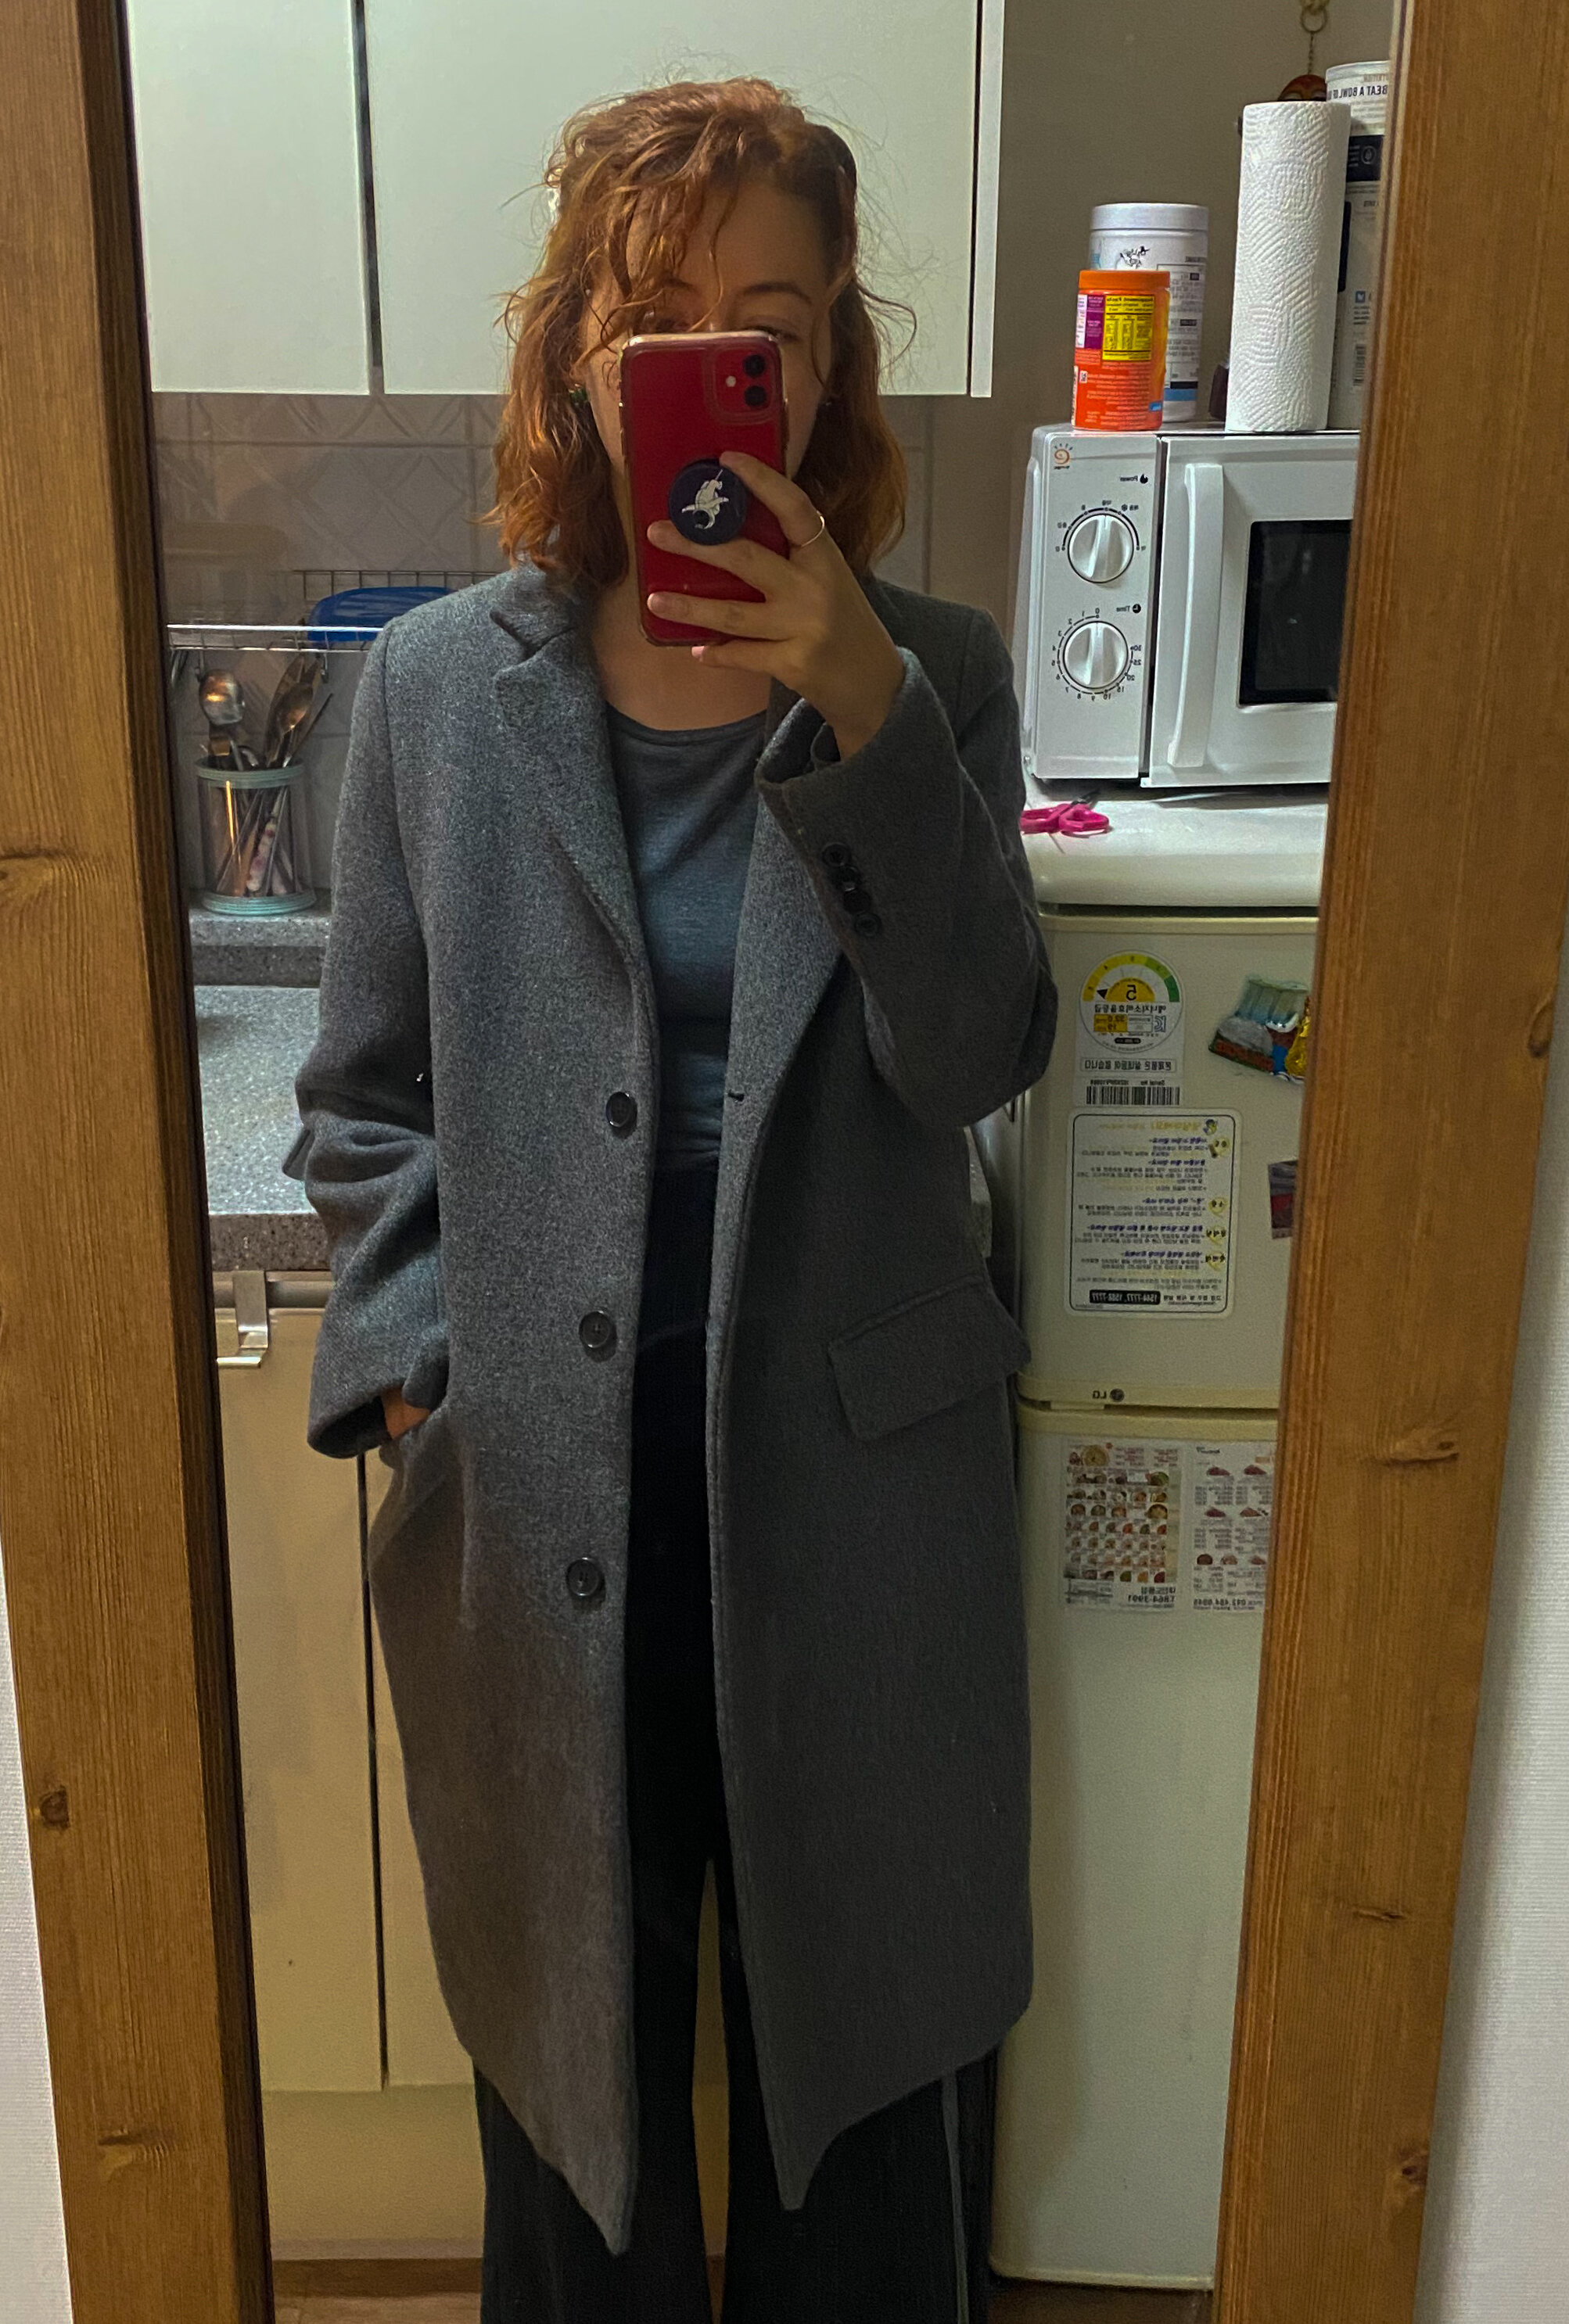 thrifted a coat for $9